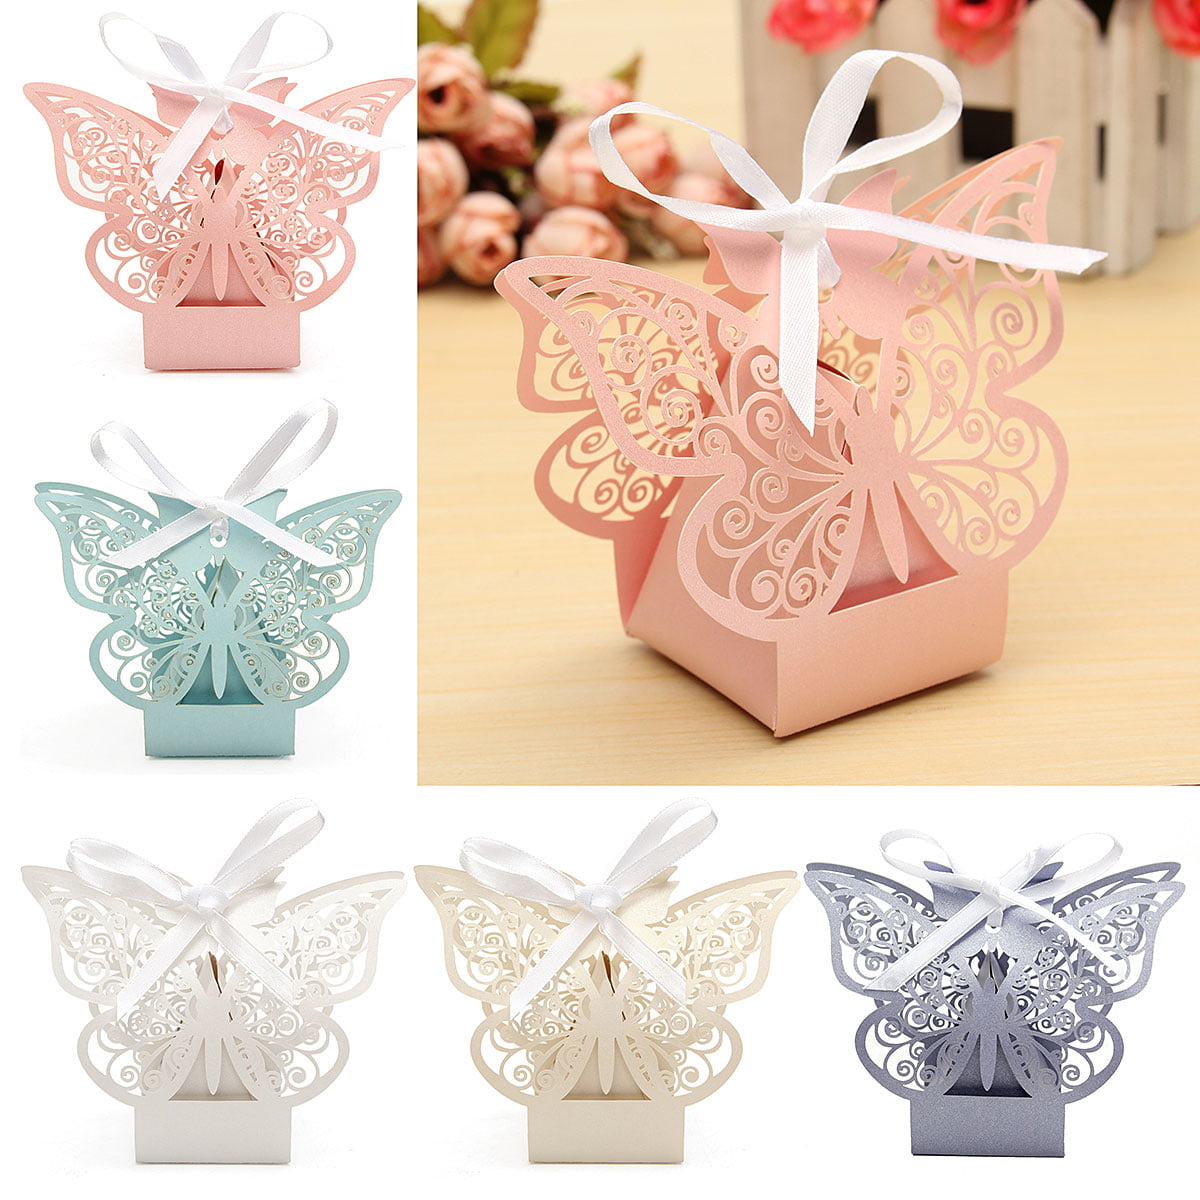 10pc Wedding Sweet Cake Candy Boxes Gift Birthday Party Favour Baby Shower  #Buy 